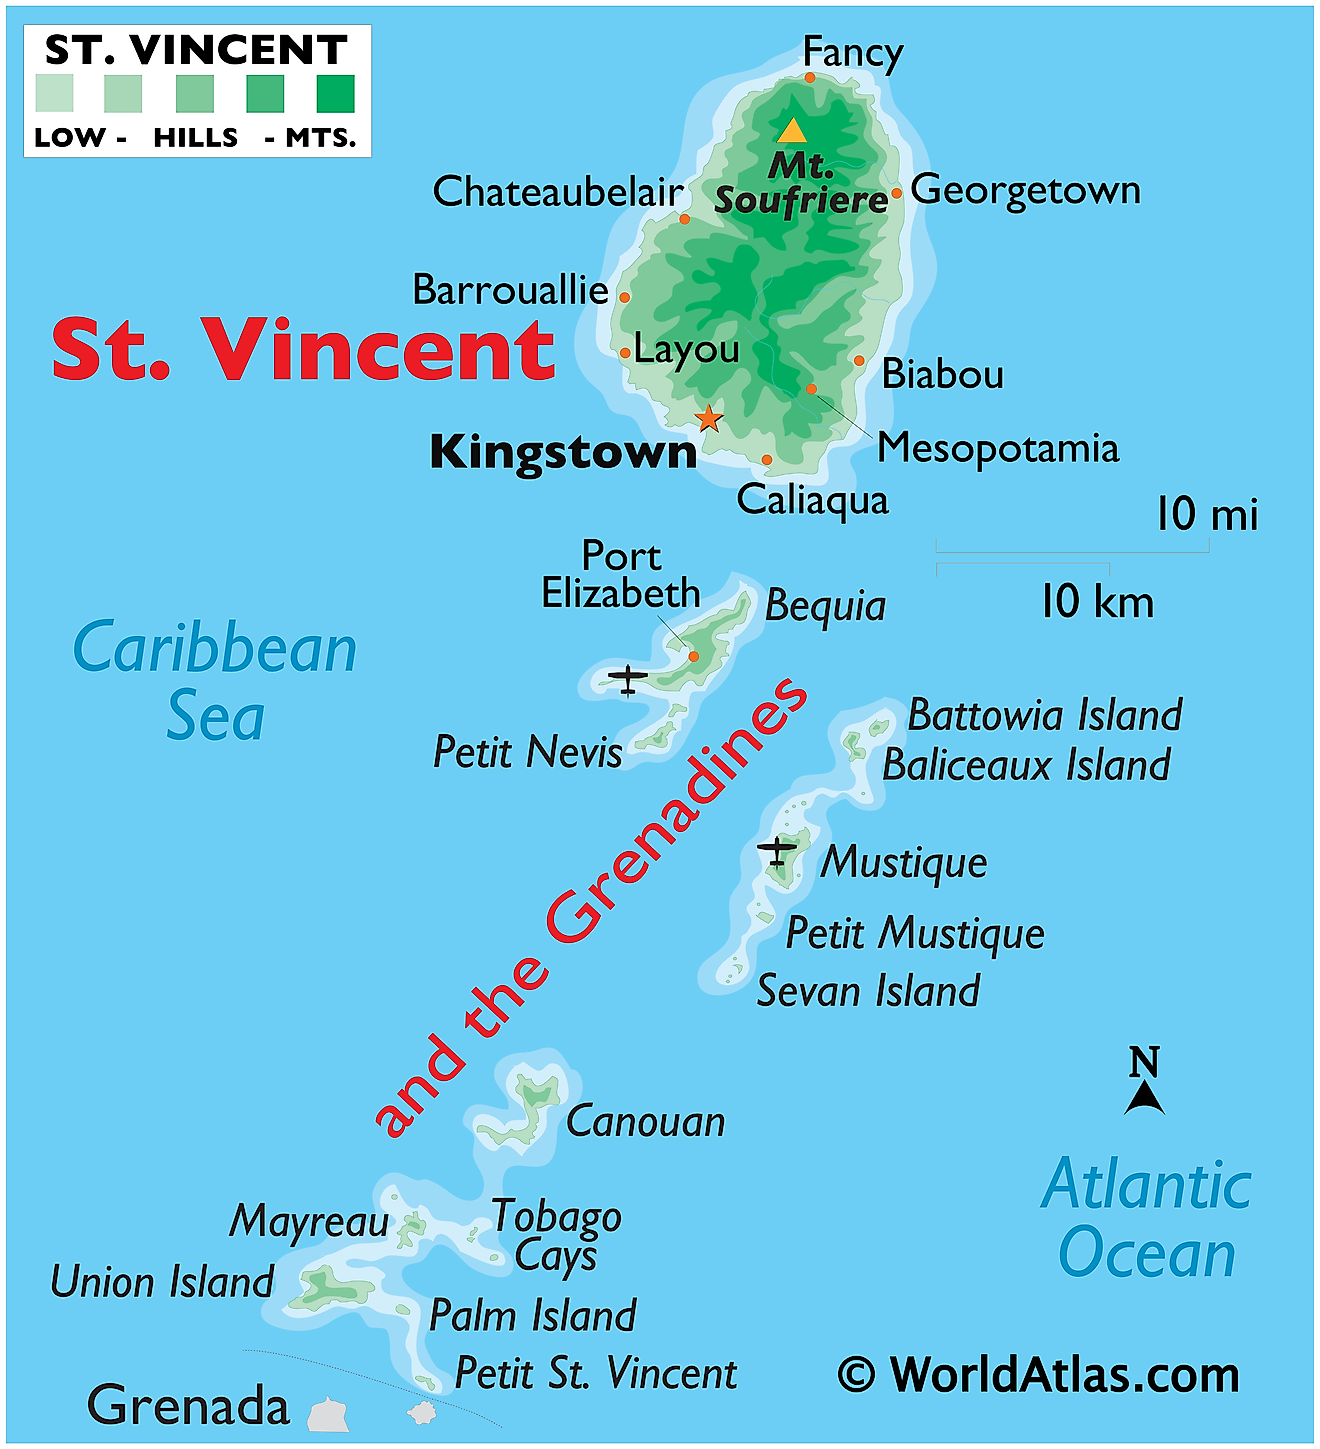 kingstown, saint vincent and the grenadines